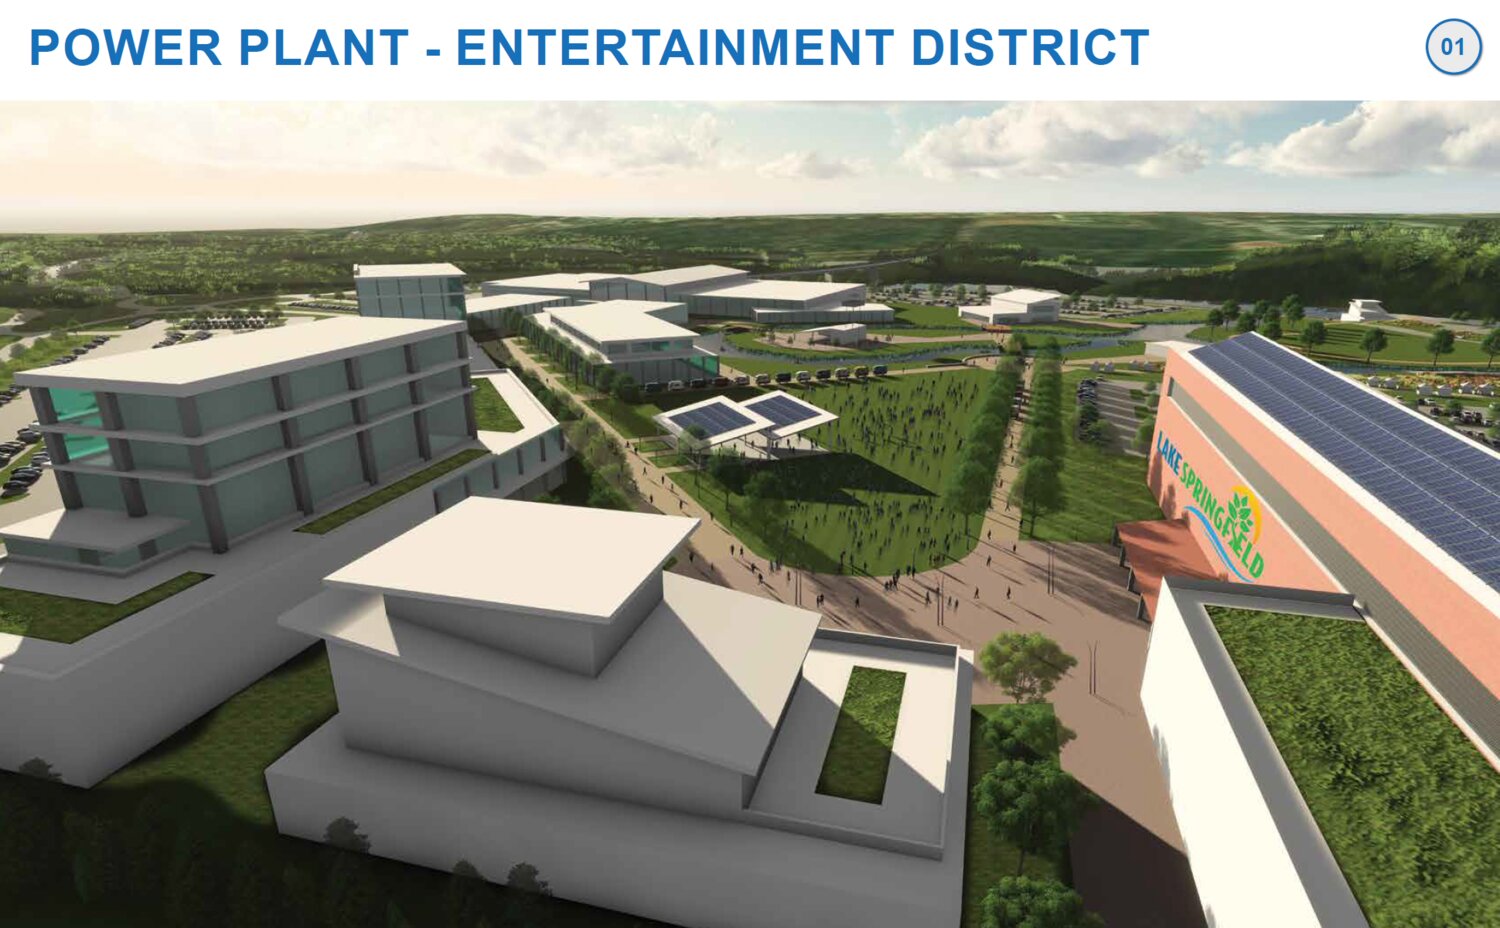 Option 1 for the power plant area of the Lake Springfield calls for an entertainment district, including a conference center, retail, restaurants, a bike park and a pavilion.